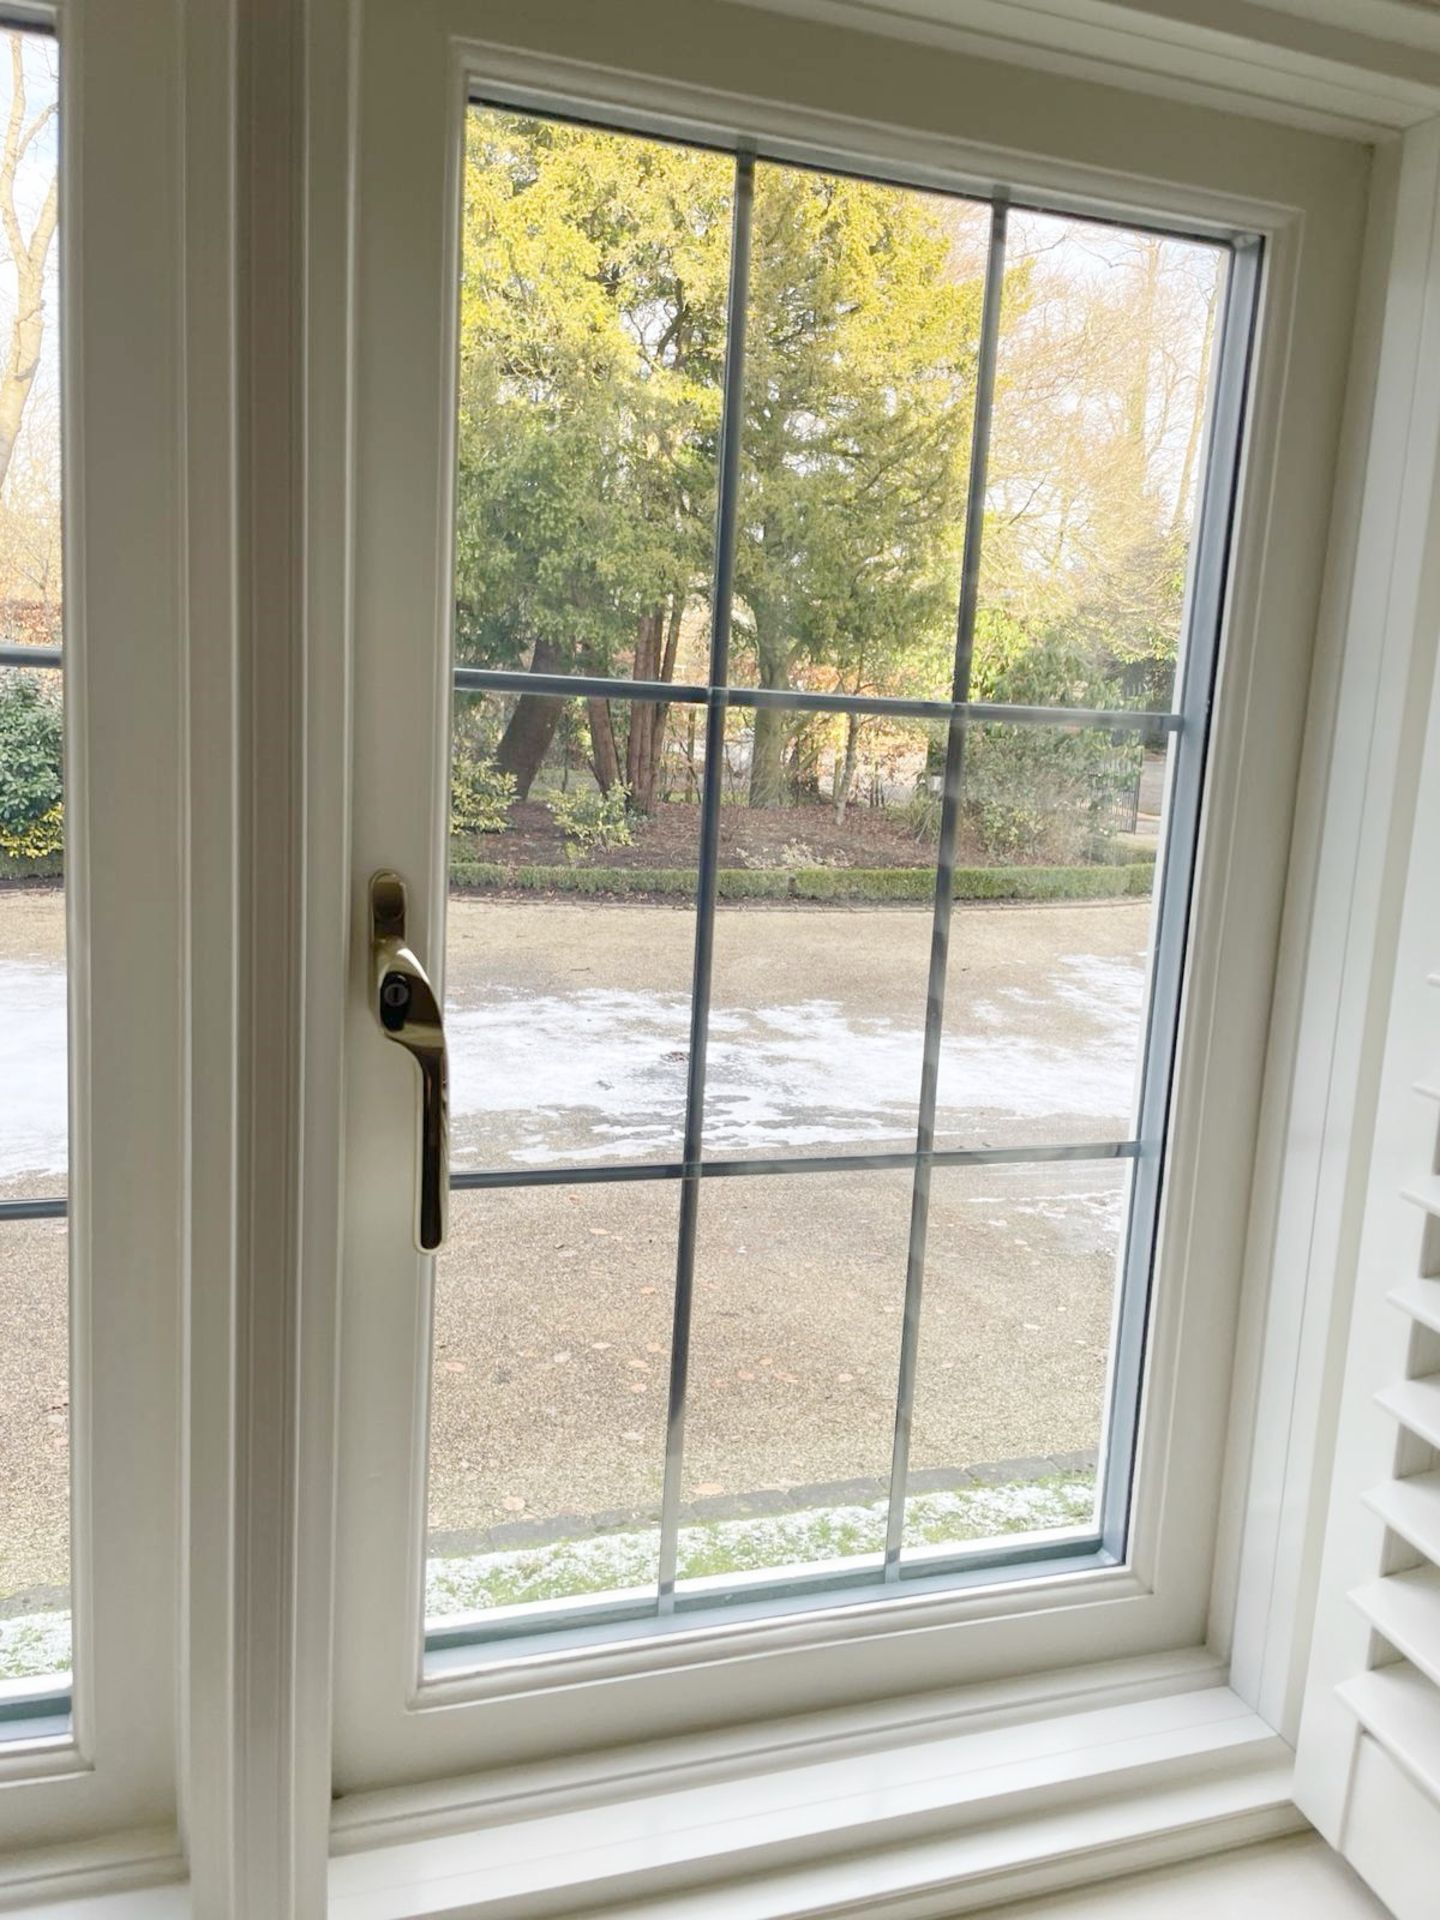 1 x Hardwood Timber Double Glazed Leaded 3-Pane Window Frame fitted with Shutter Blinds - Image 7 of 15